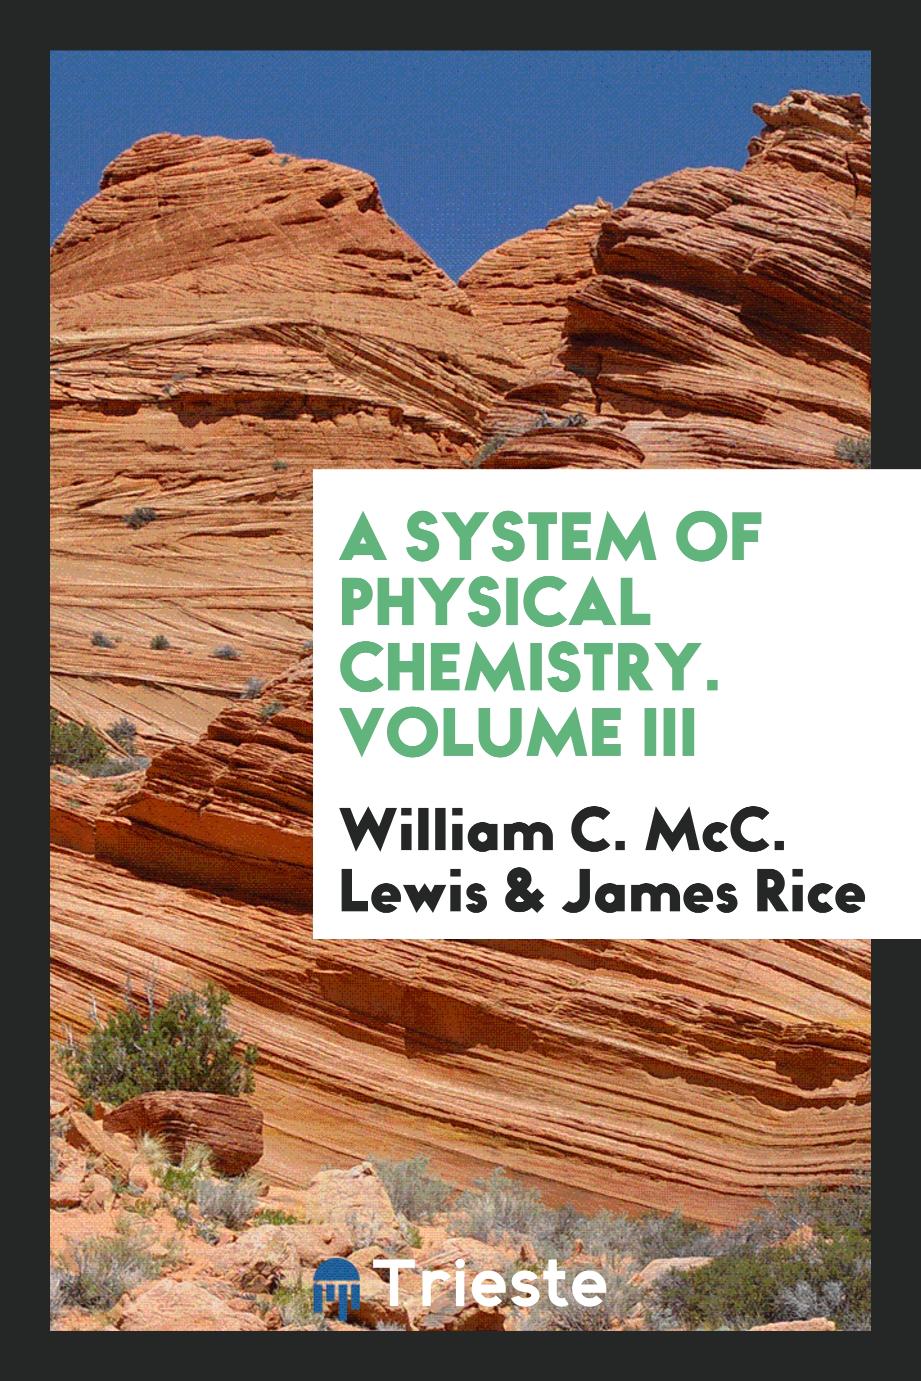 A system of physical chemistry. Volume III